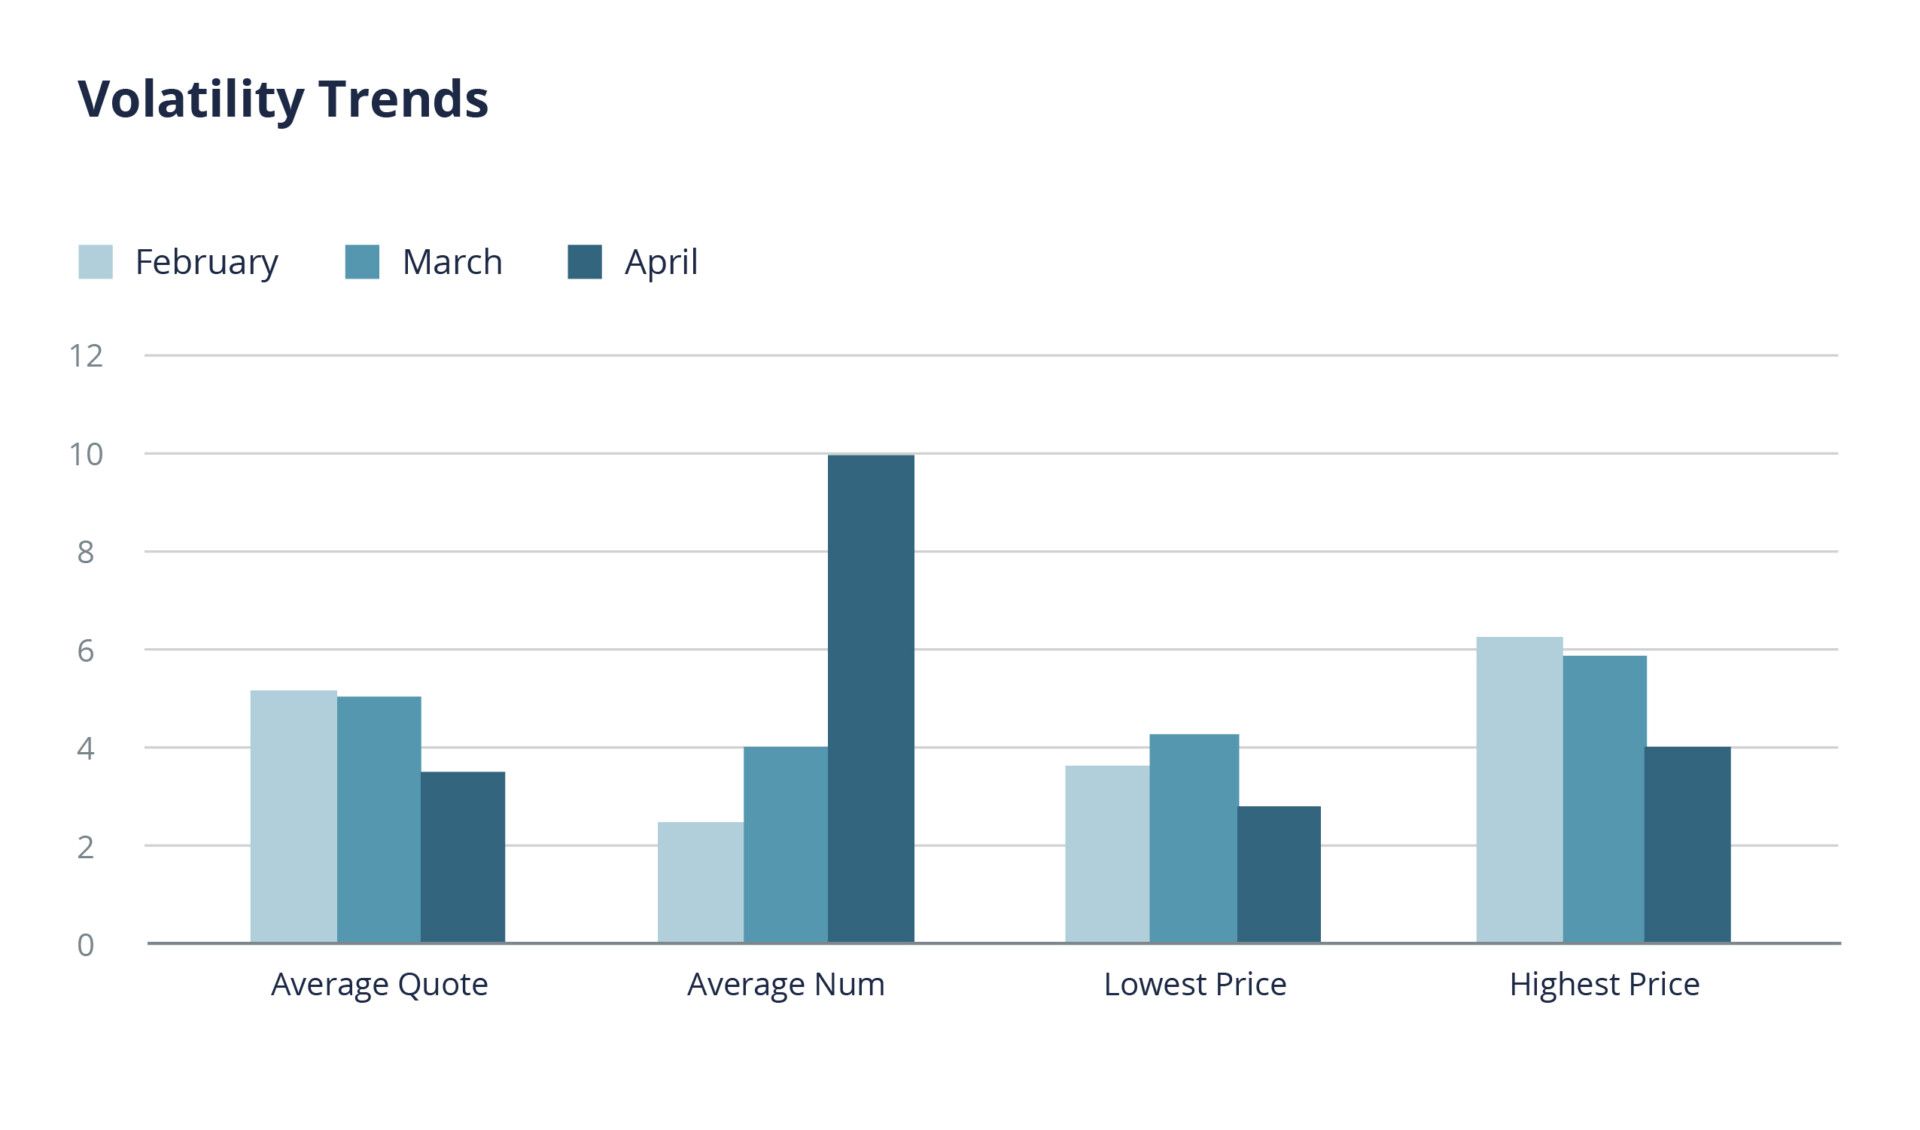 Global Volatility Trends, February March and April